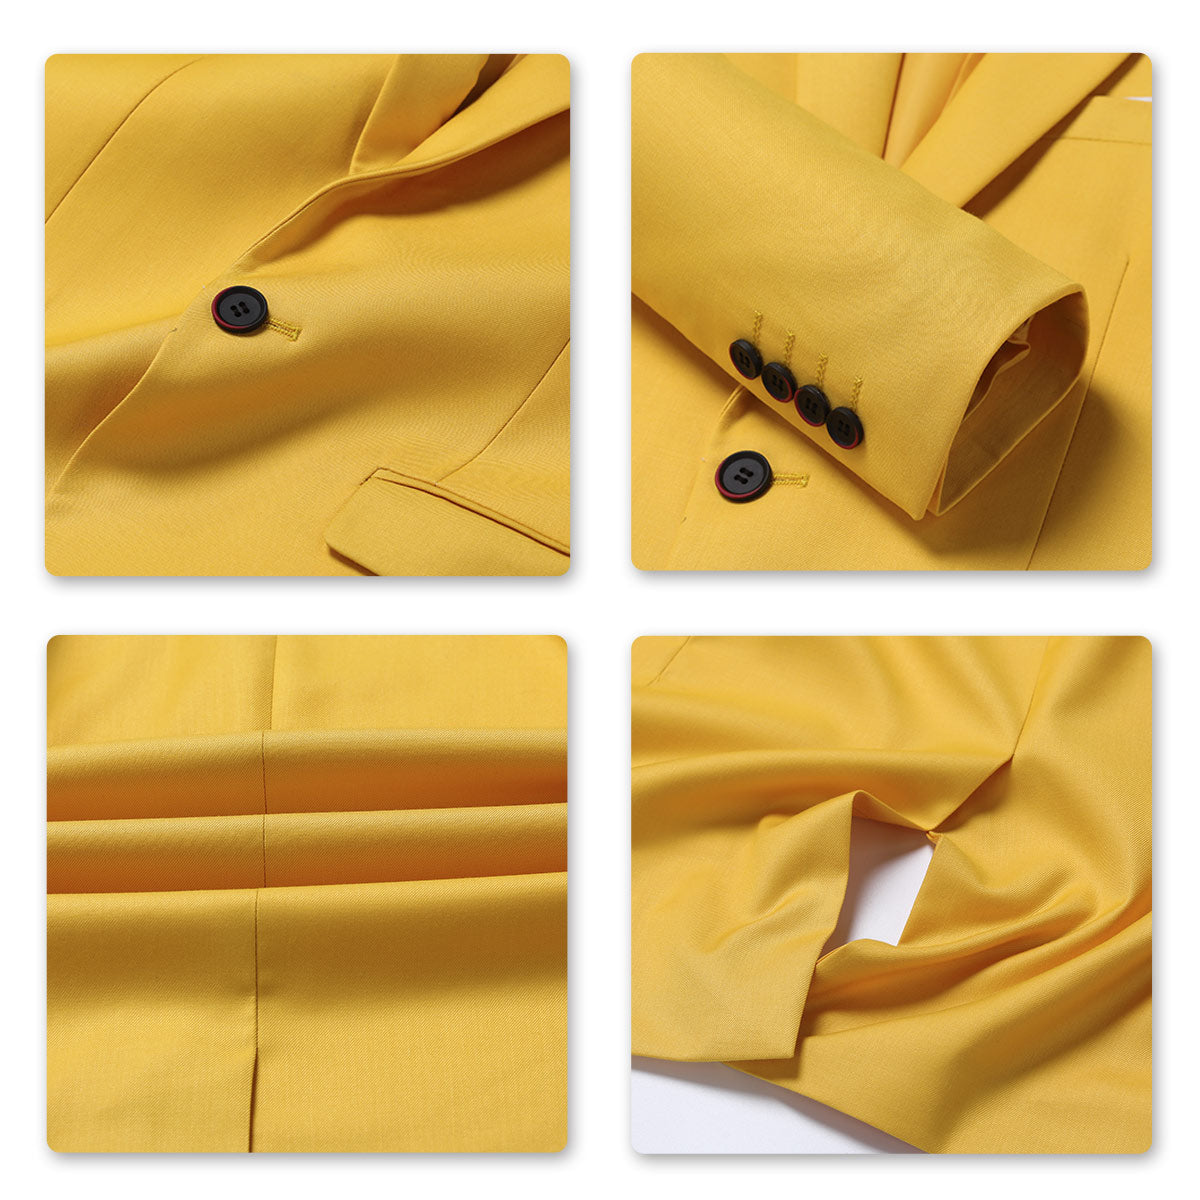 Mens Solid Color One Button Single Breasted Blazer Yellow